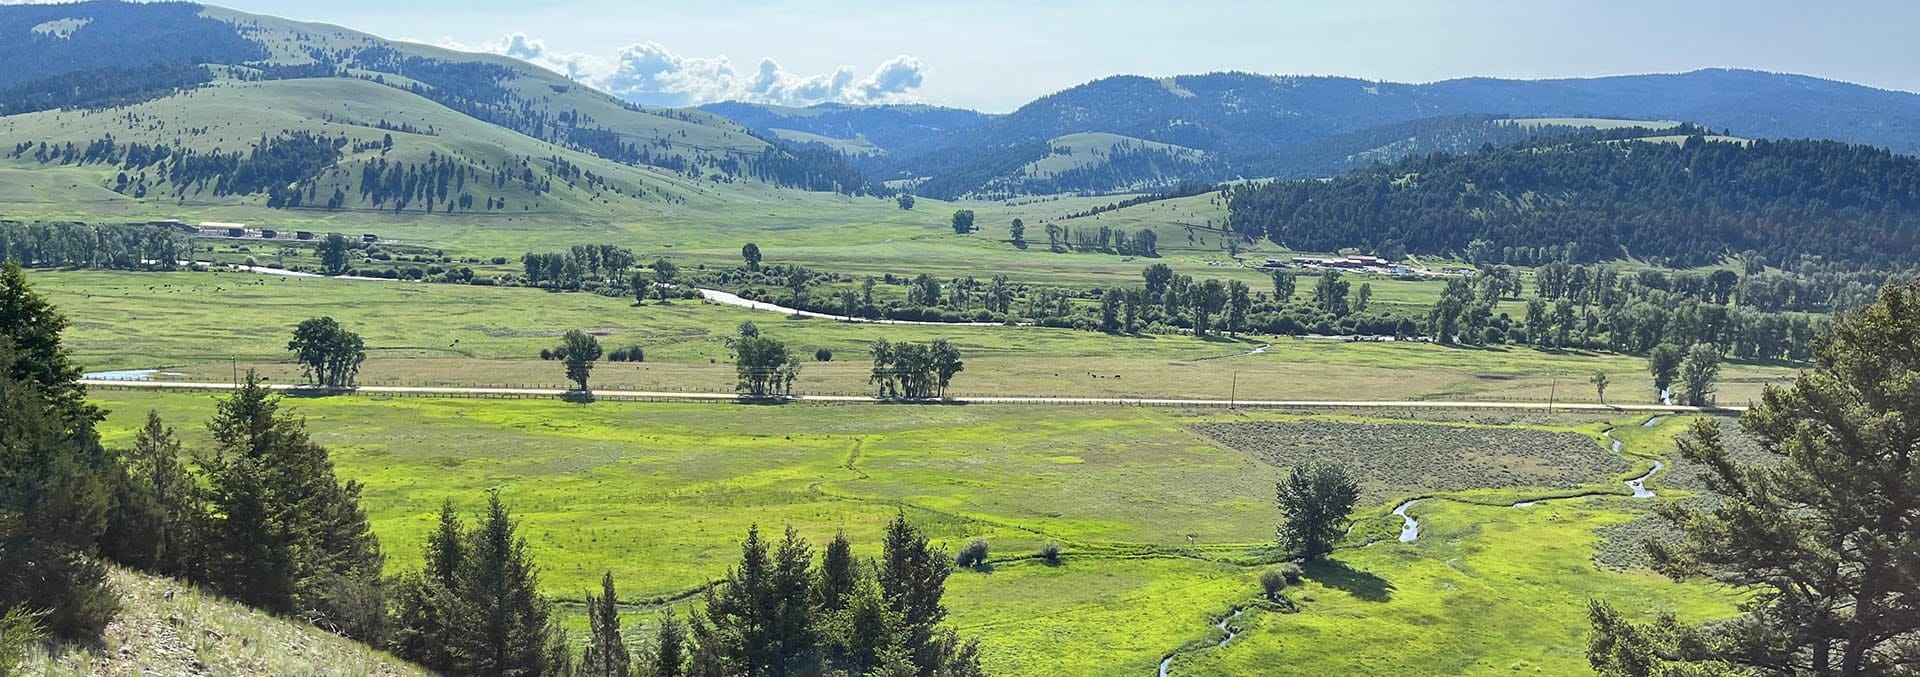 montana ranches for sale upper rock creek retreat